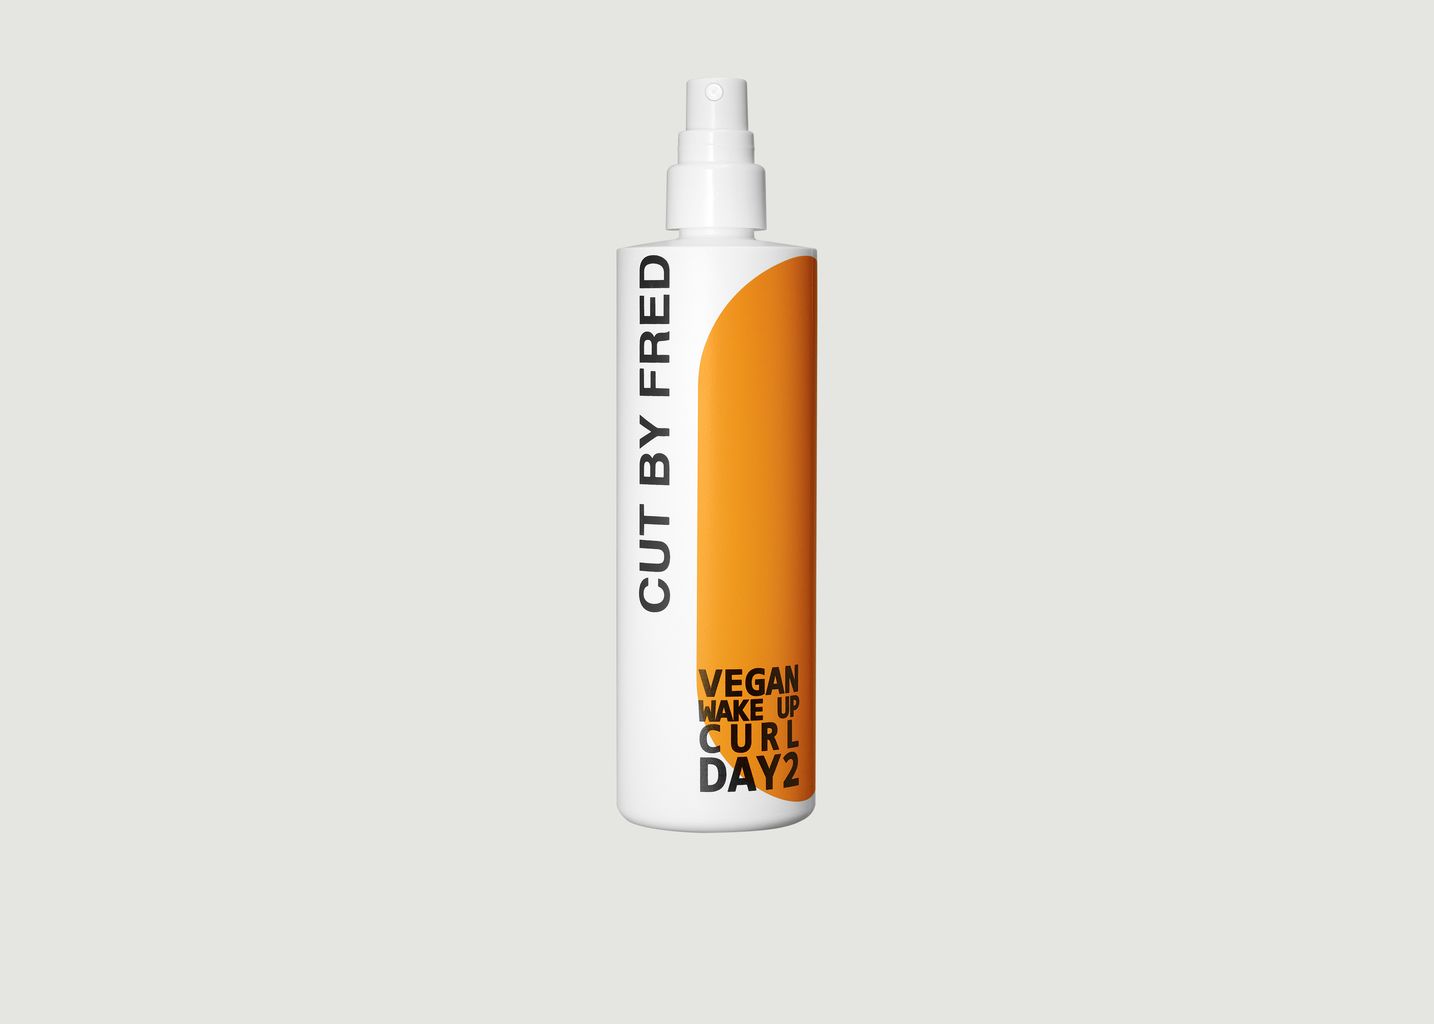 Wake Up Curl Day 2 150ml - Cut by Fred